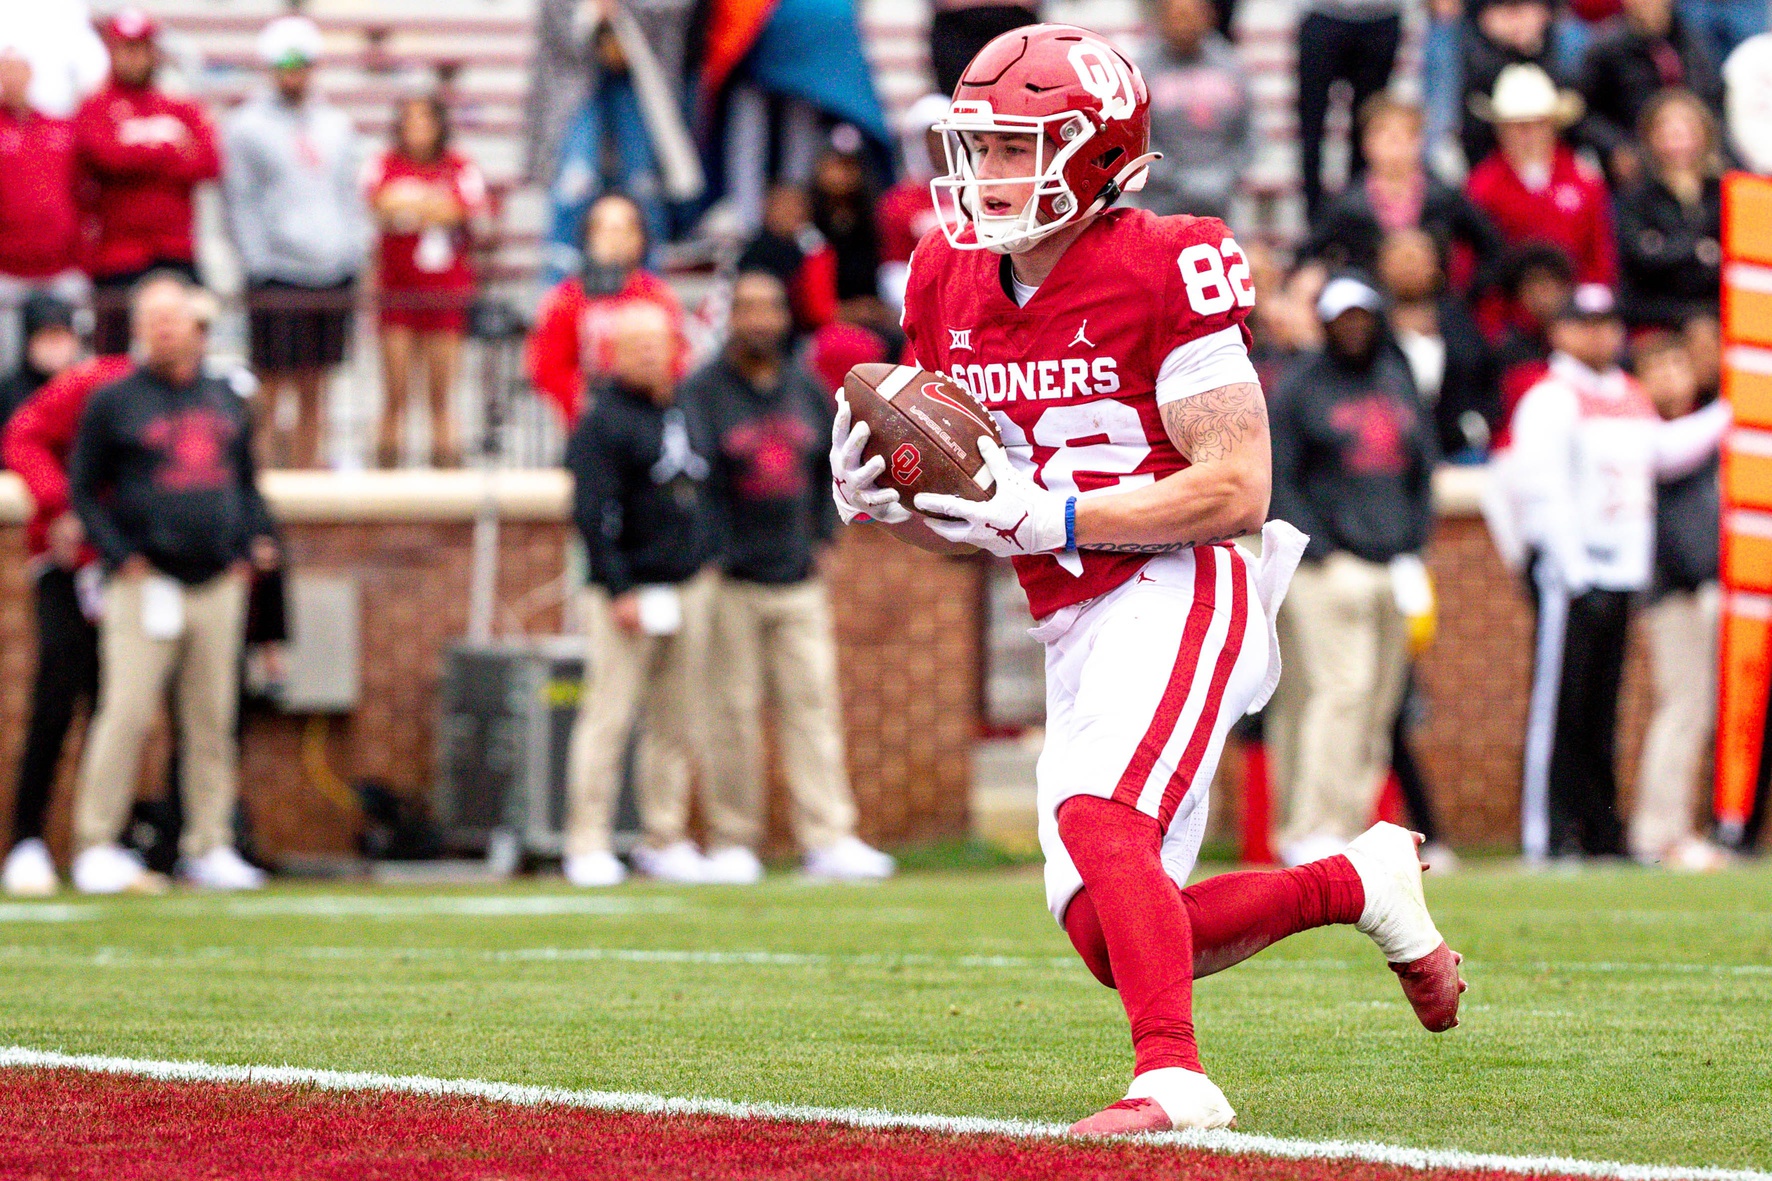 5 standouts from the Oklahoma Sooners’ spring game